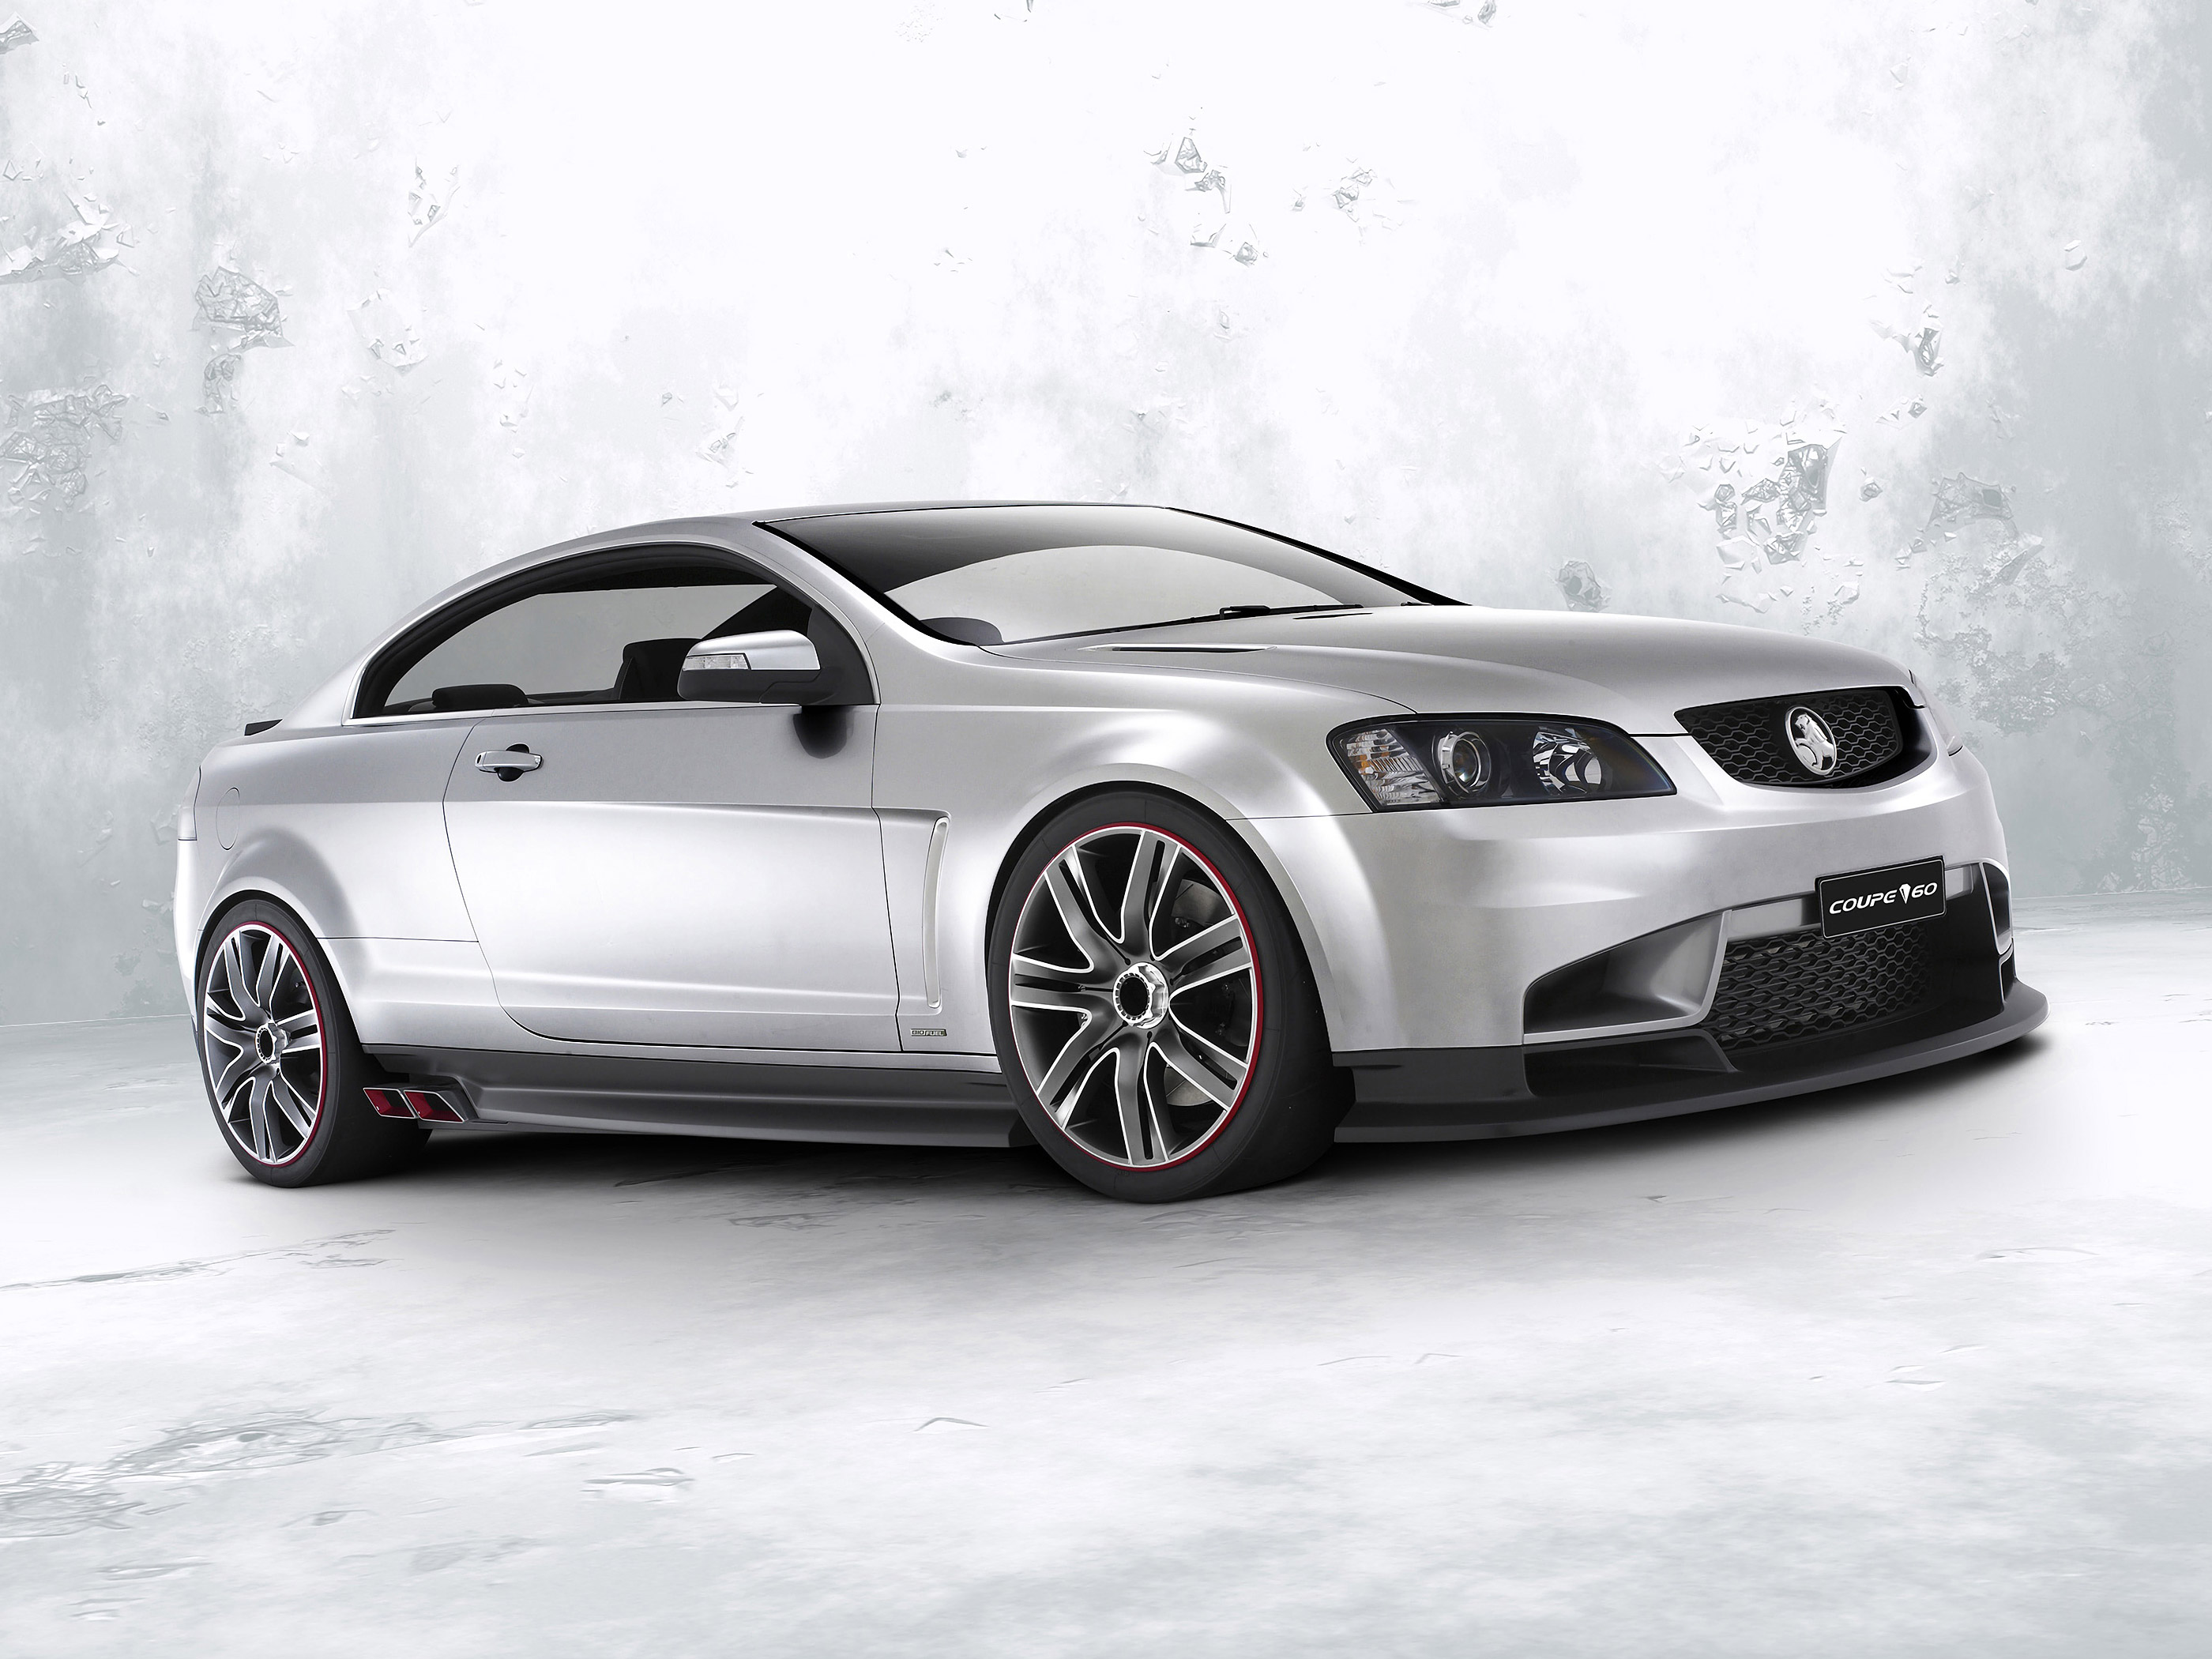  2008 Holden Coupe 60 Concept Wallpaper.